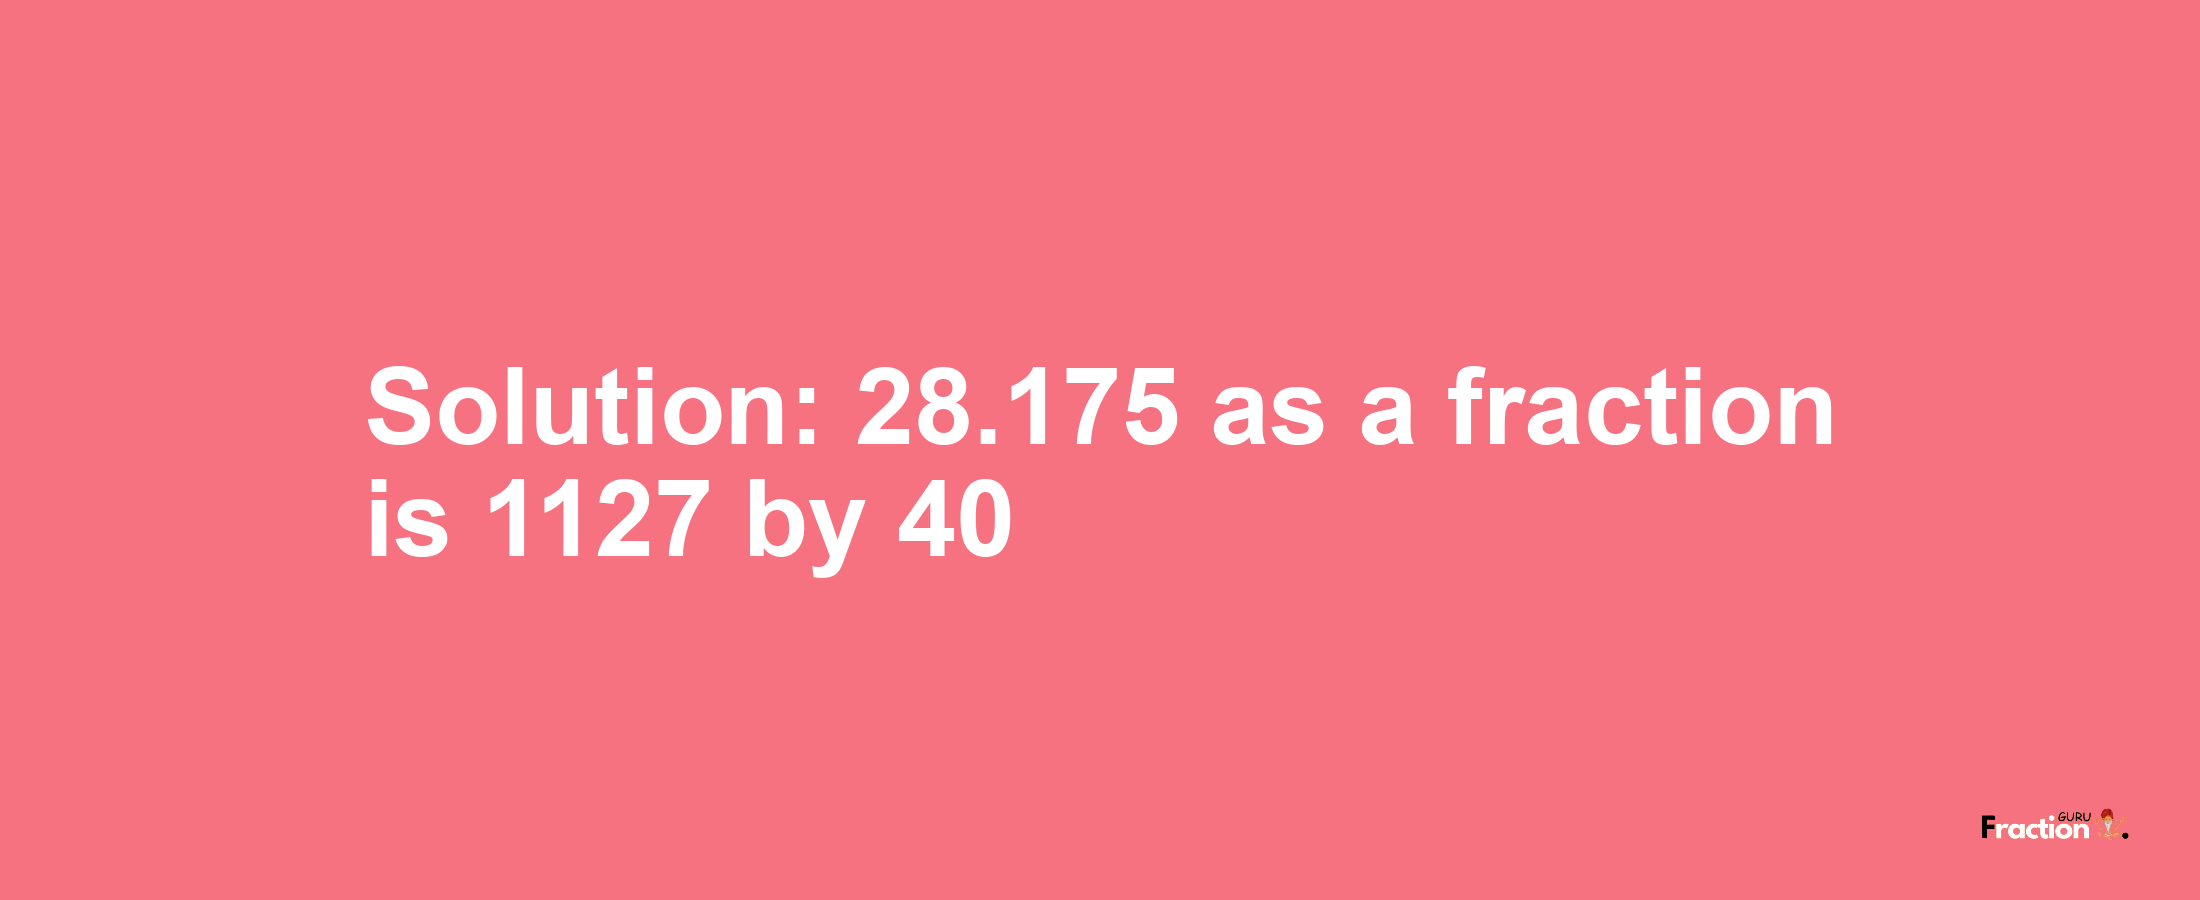 Solution:28.175 as a fraction is 1127/40